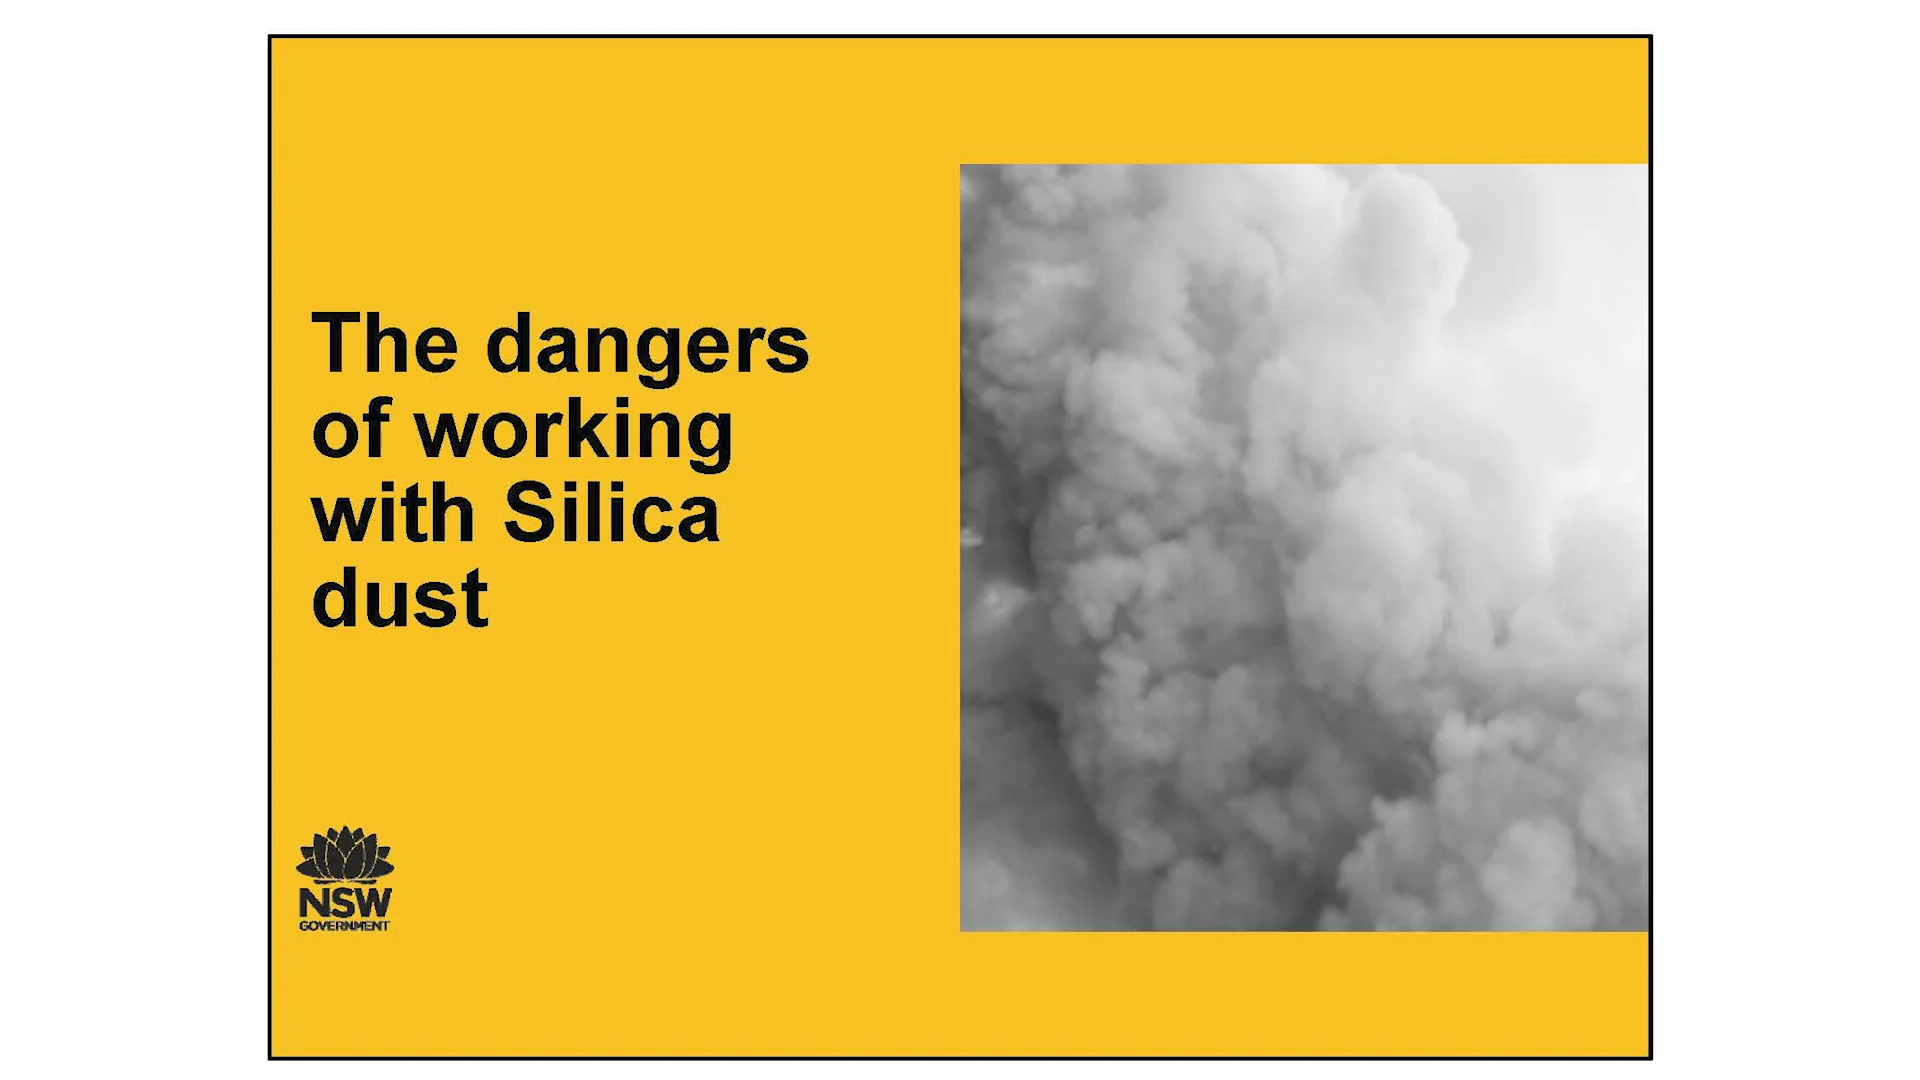 The dangers of silica dust